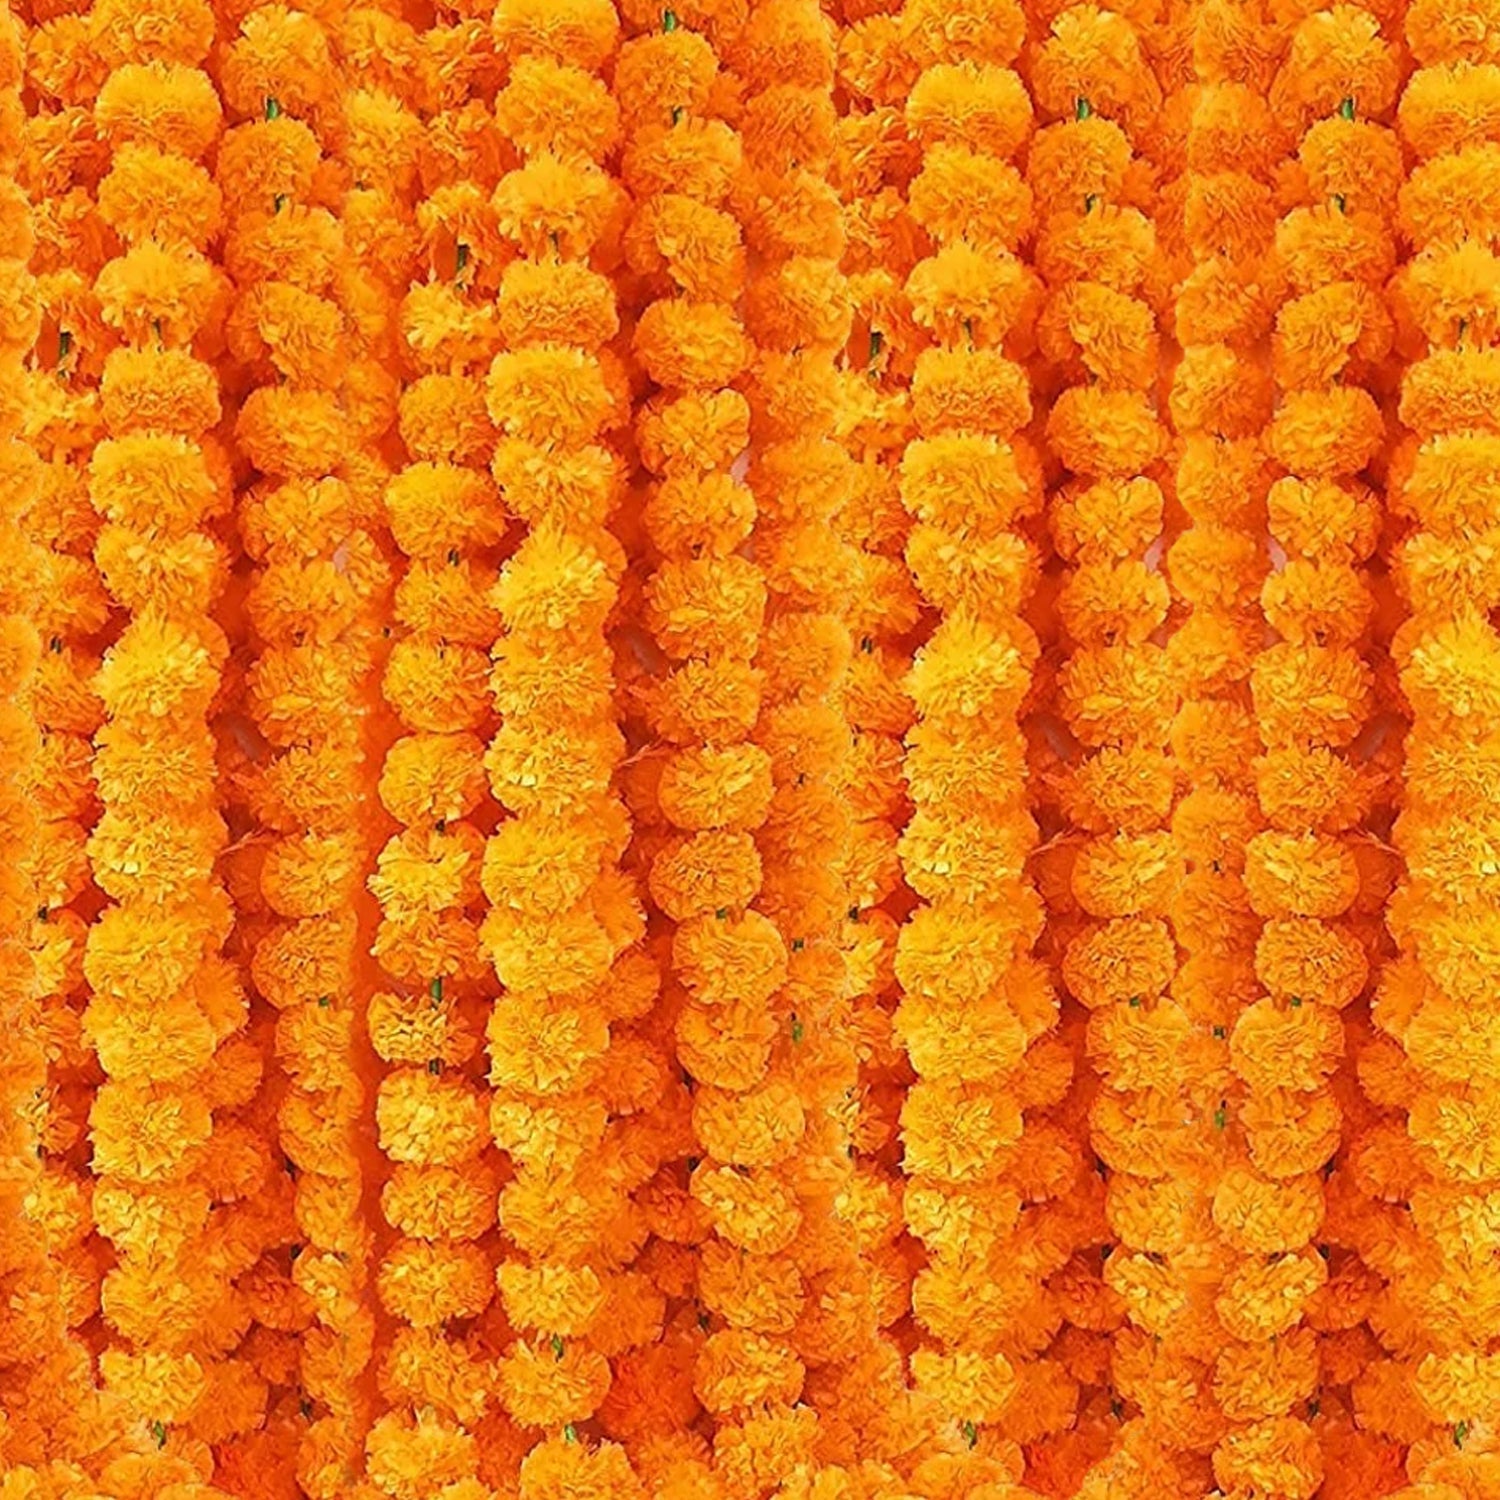 5 Feet Long Marigold Garland For Home Decoration